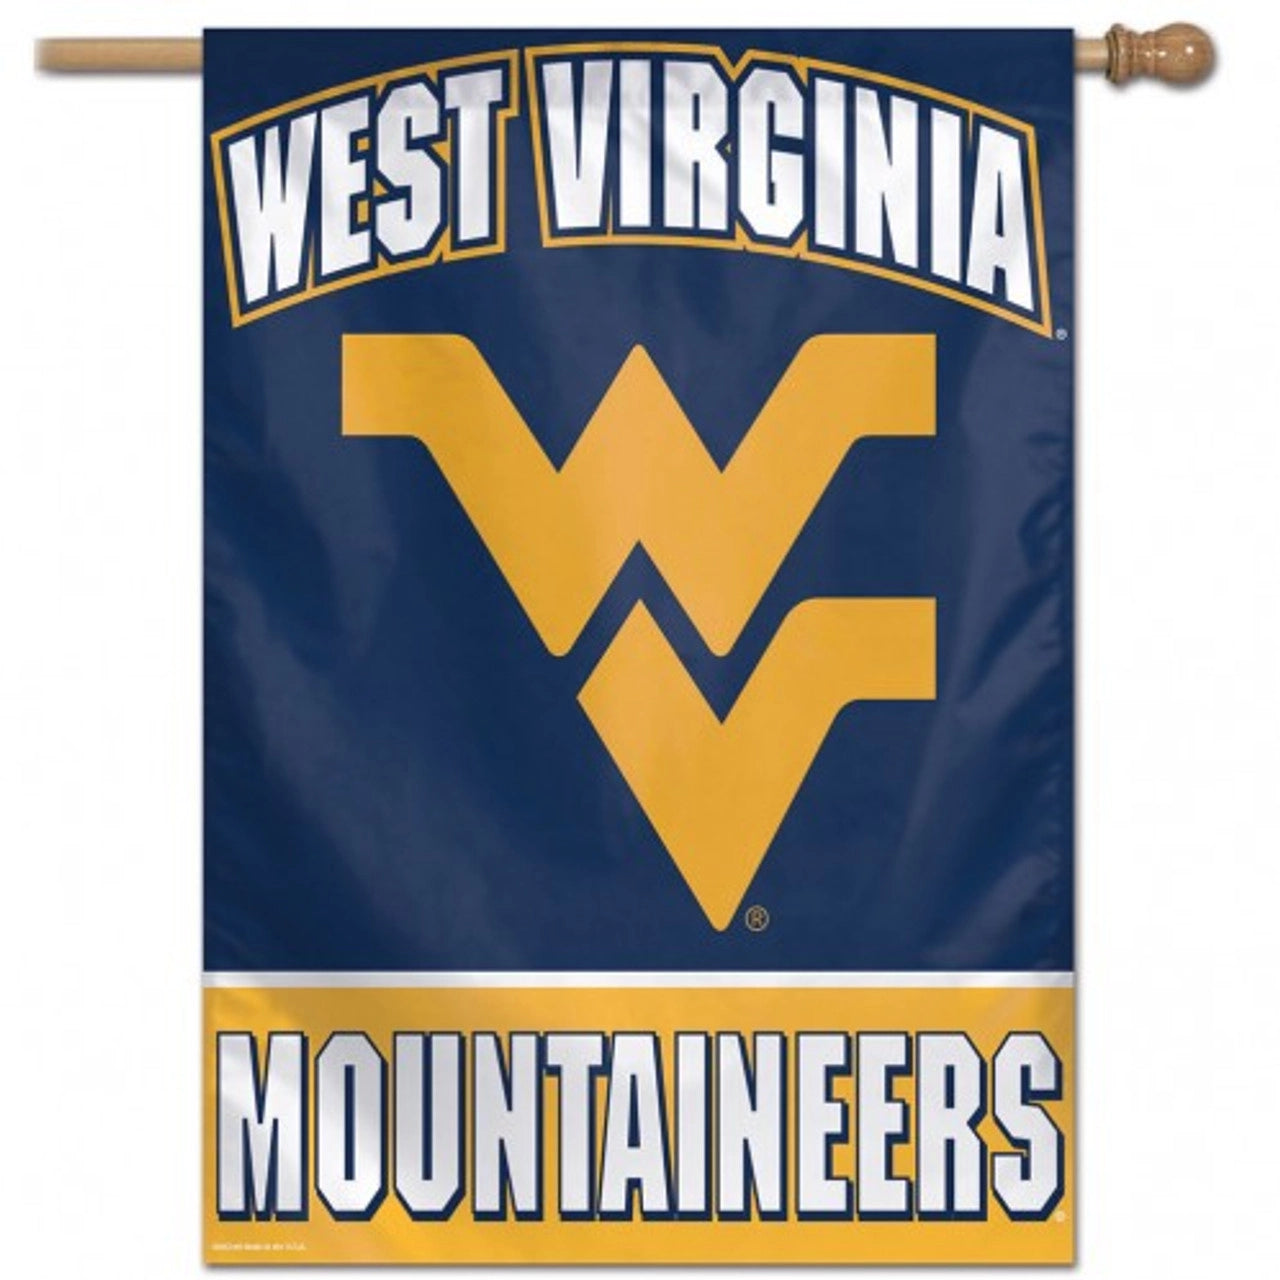 West Virginia Mountaineers 28" x 40" Vertical House Flag/Banner by Wincraft